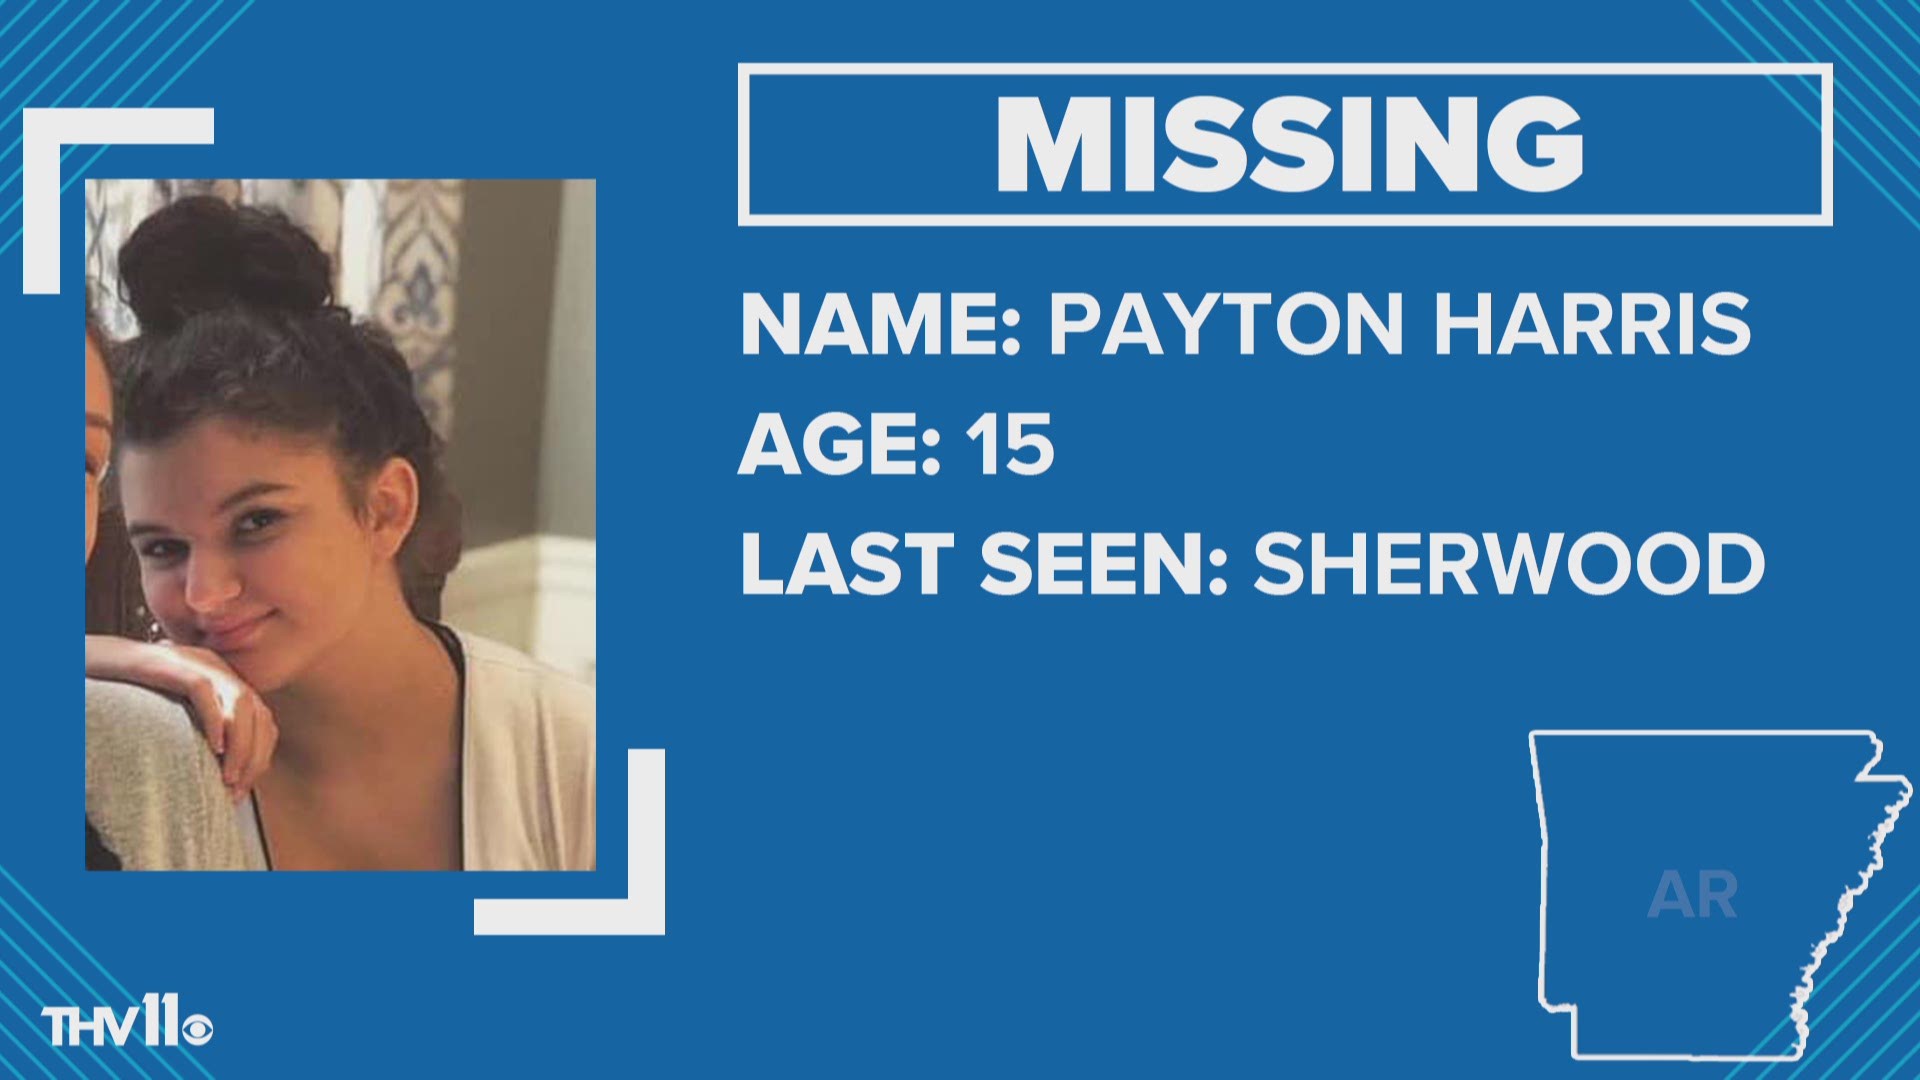 Payton Harris has been missing from Sherwood since Friday afternoon.